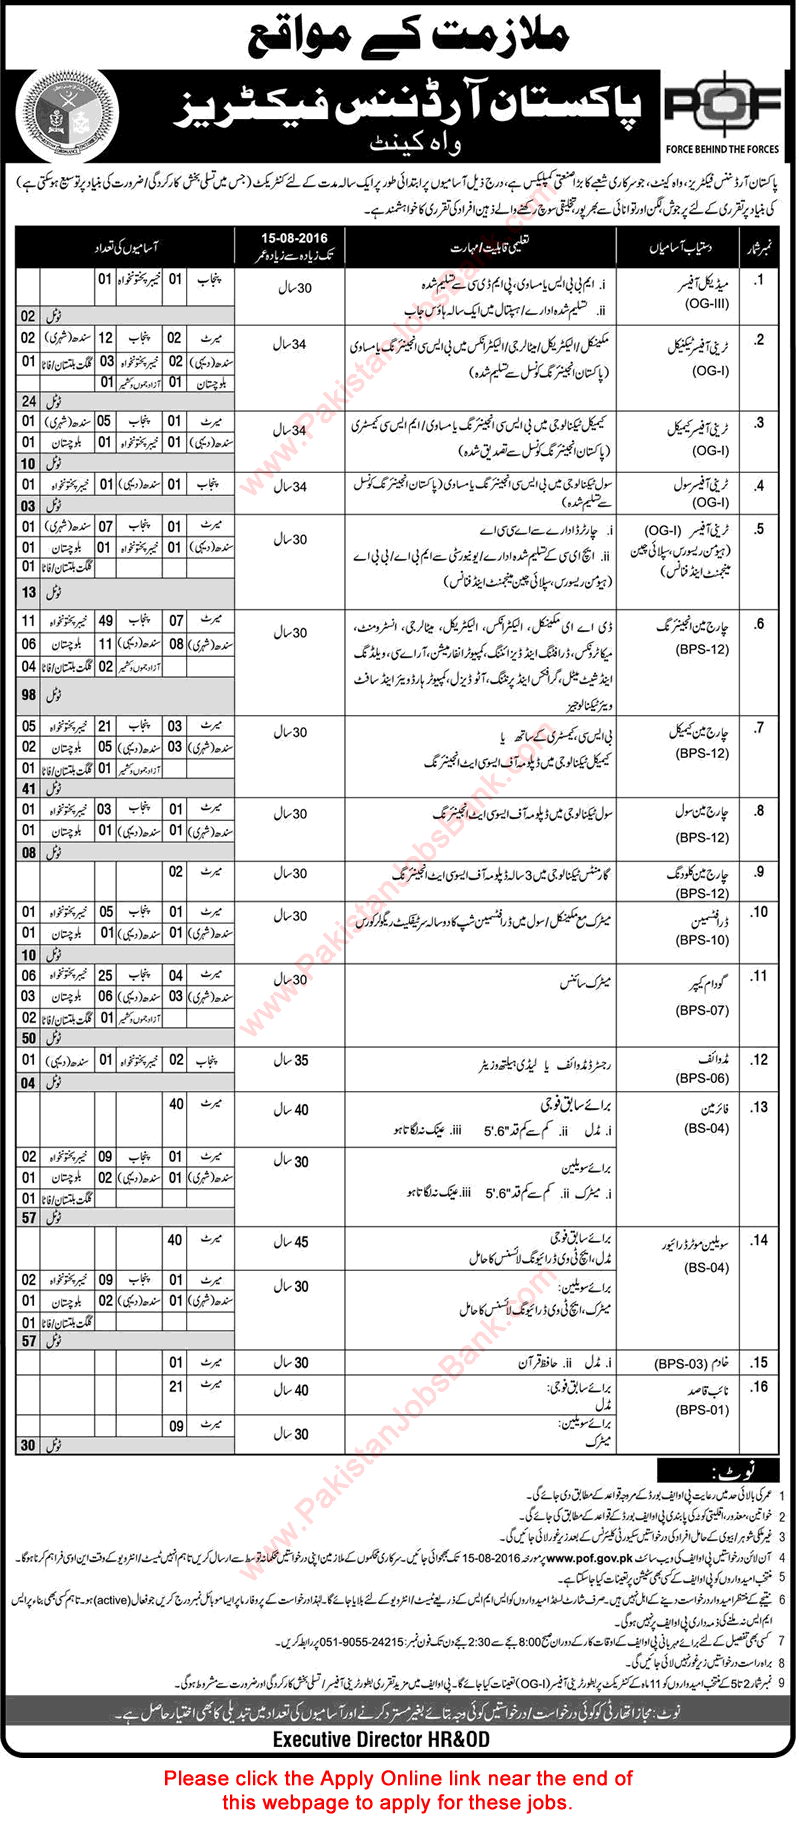 POF Wah Cantt Jobs August 2016 Apply Online Chargemen, Trainee Officers, Firemen & Others Latest / New